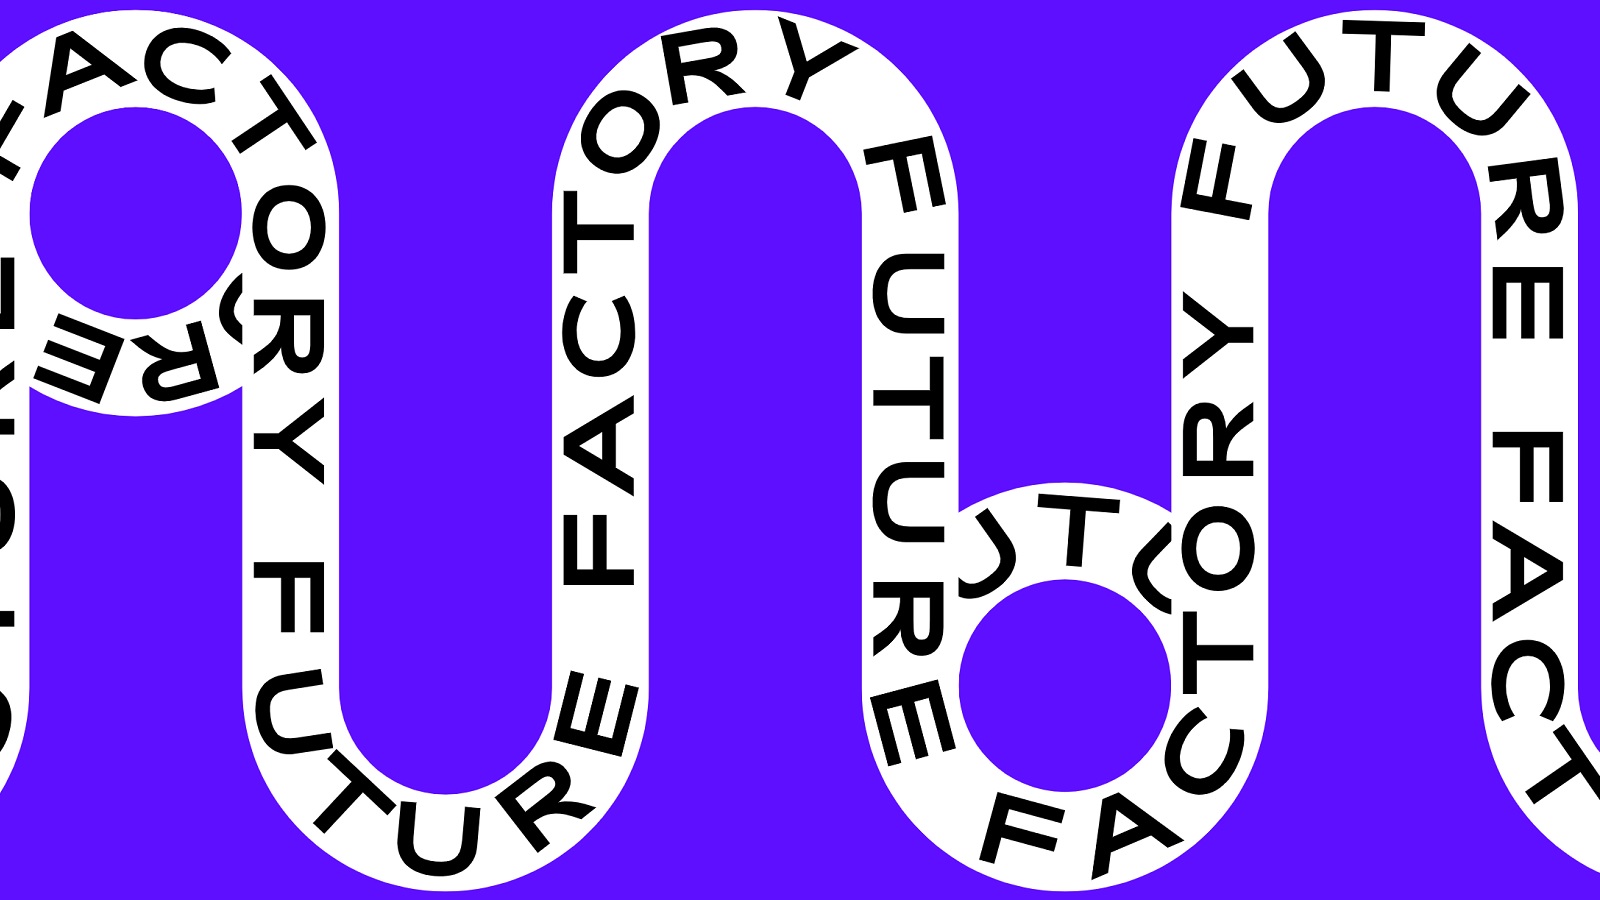 Future Factory Plays on Its Name to Generate Its New Identity